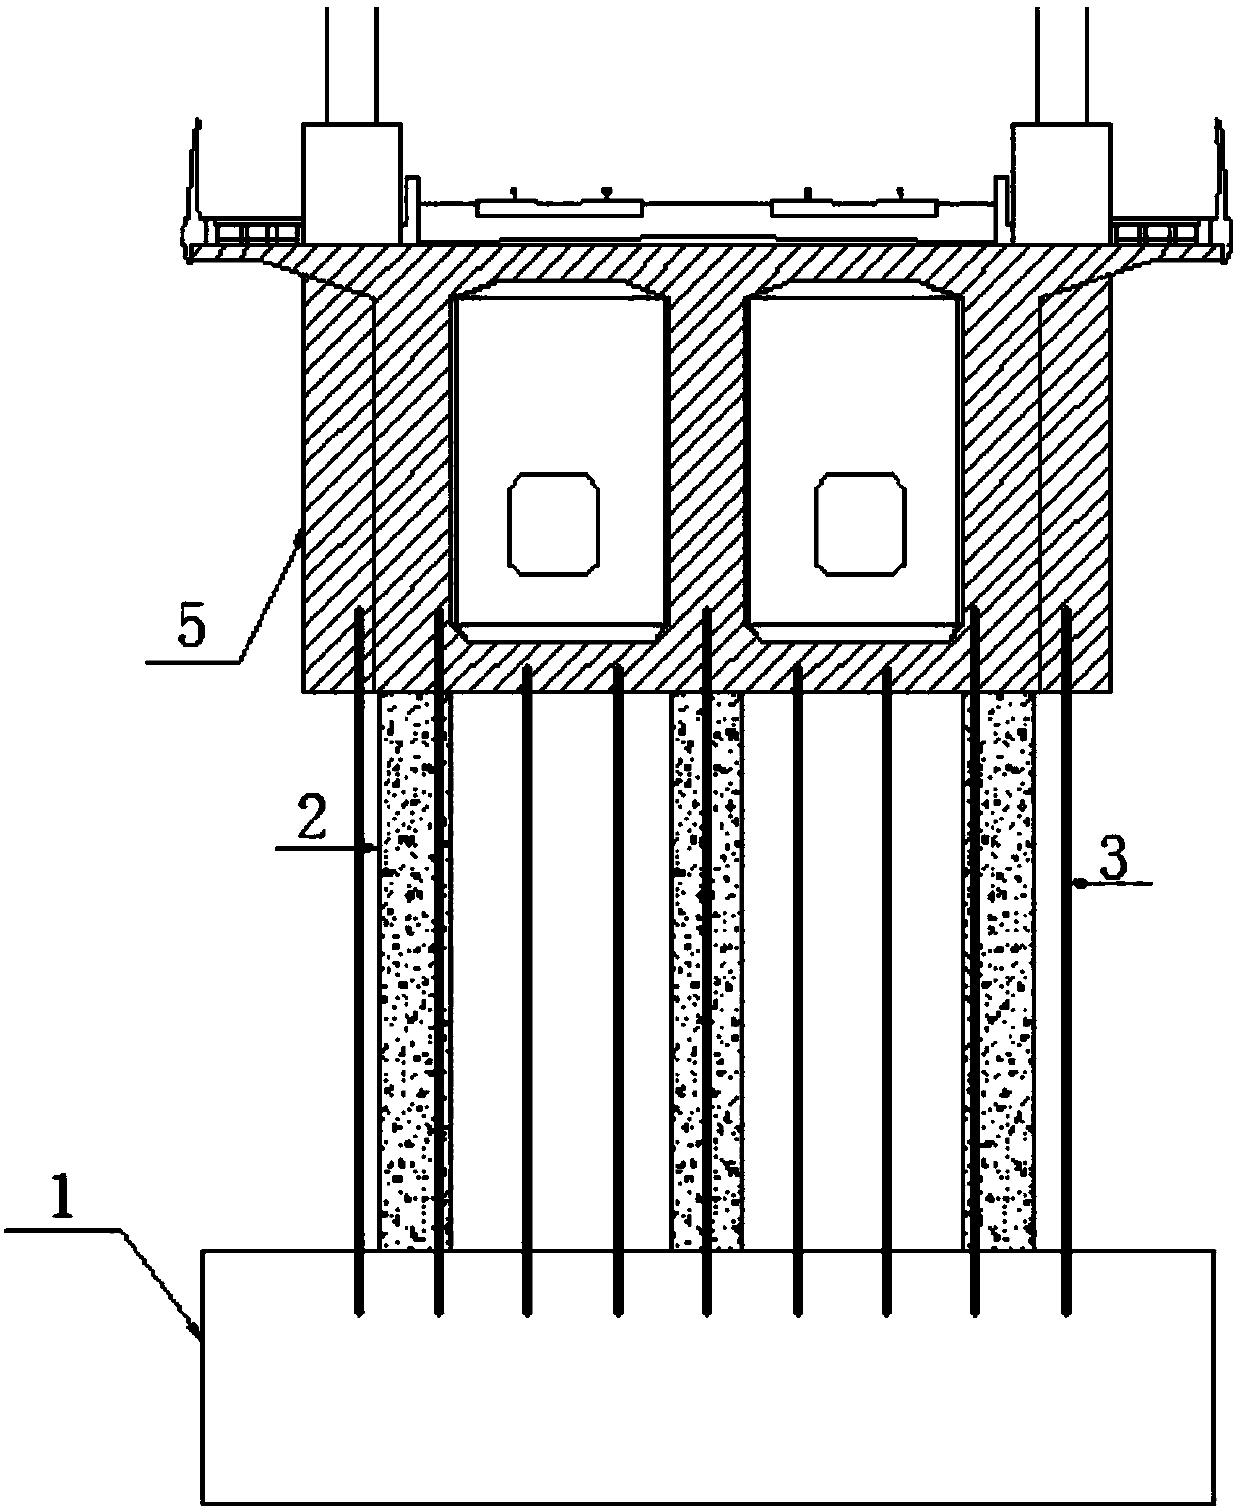 Concrete continuous girder cantilever construction load balance adjusting device and method